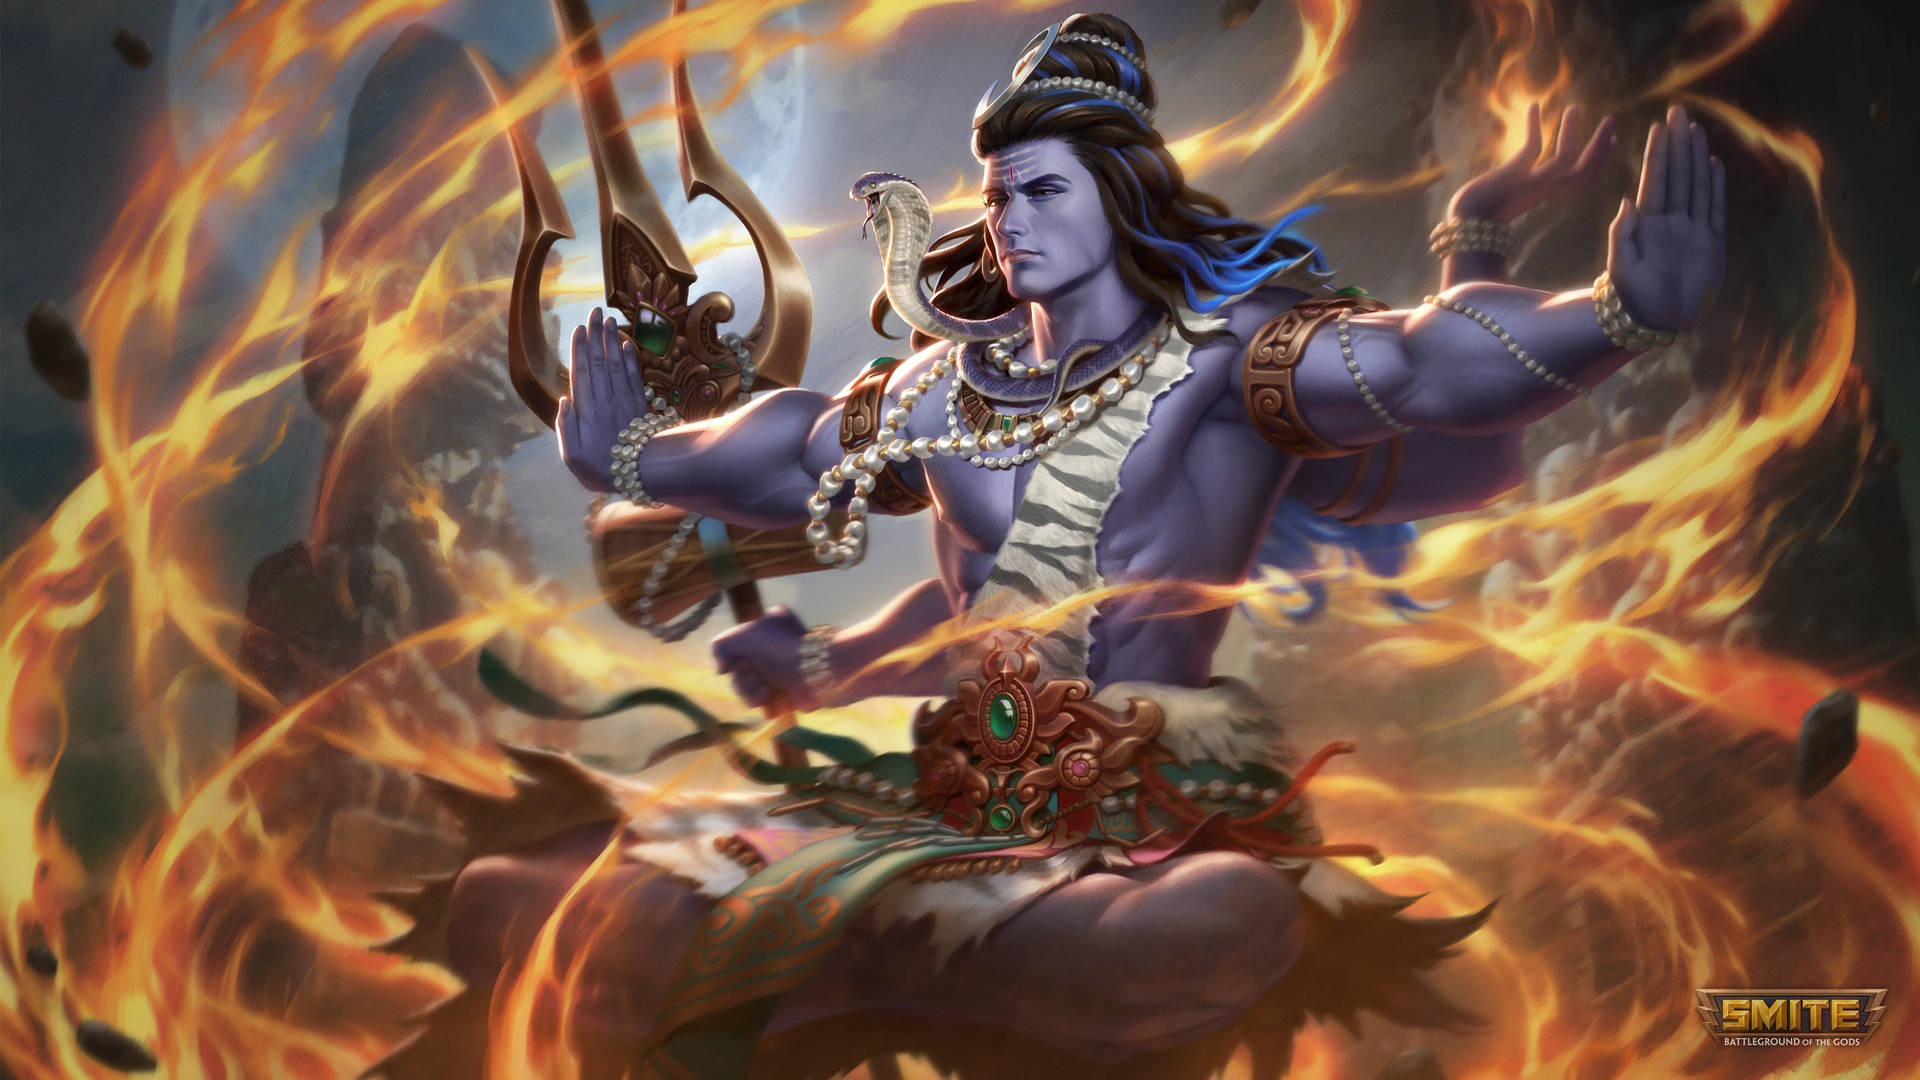 Lord Shiva 4k Surrounded By Flames Background